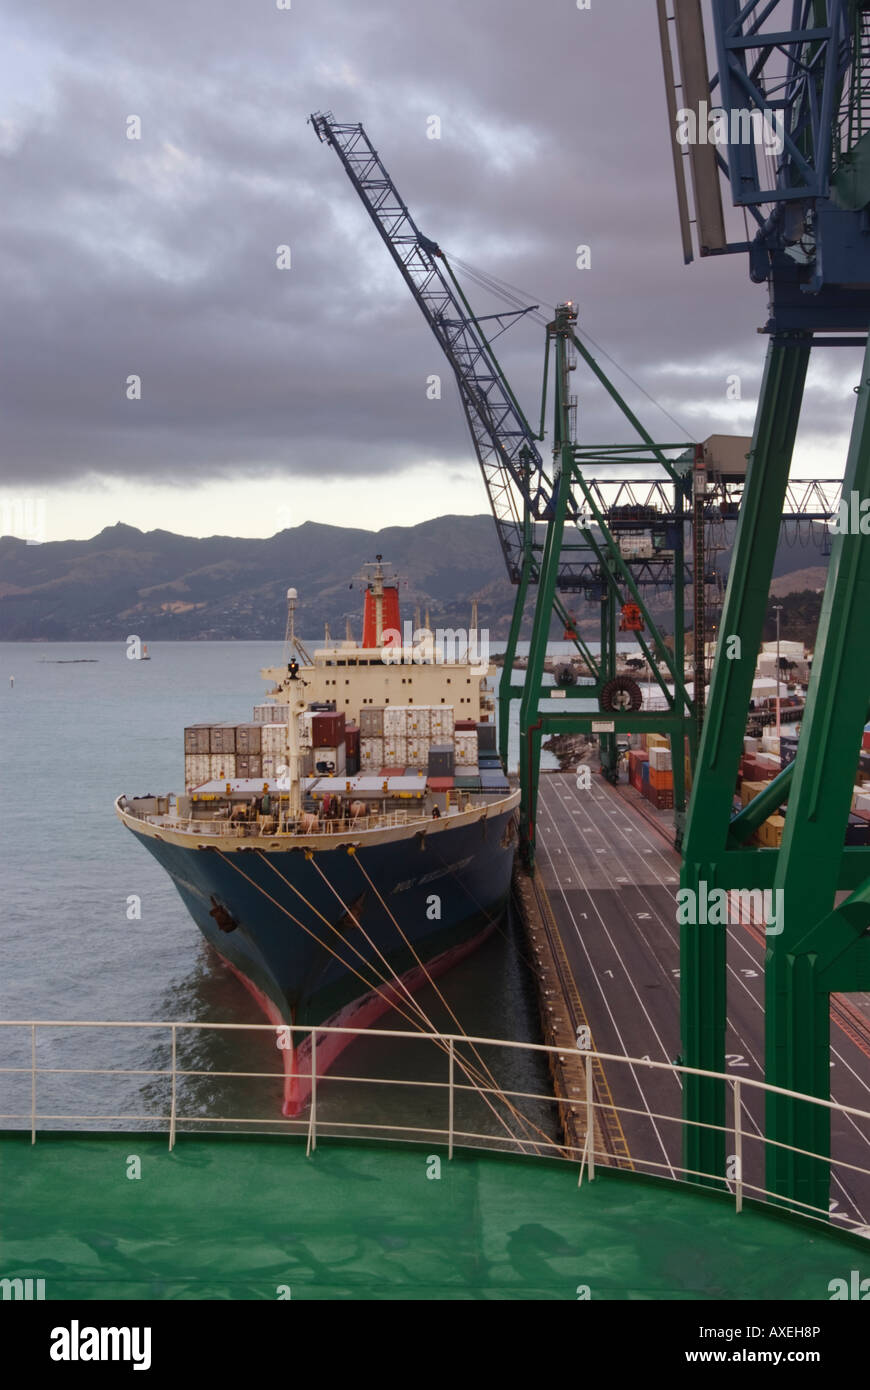 A container ship at her berth in Lyttelton New  Zealand as viewed from a car ship. Stock Photo